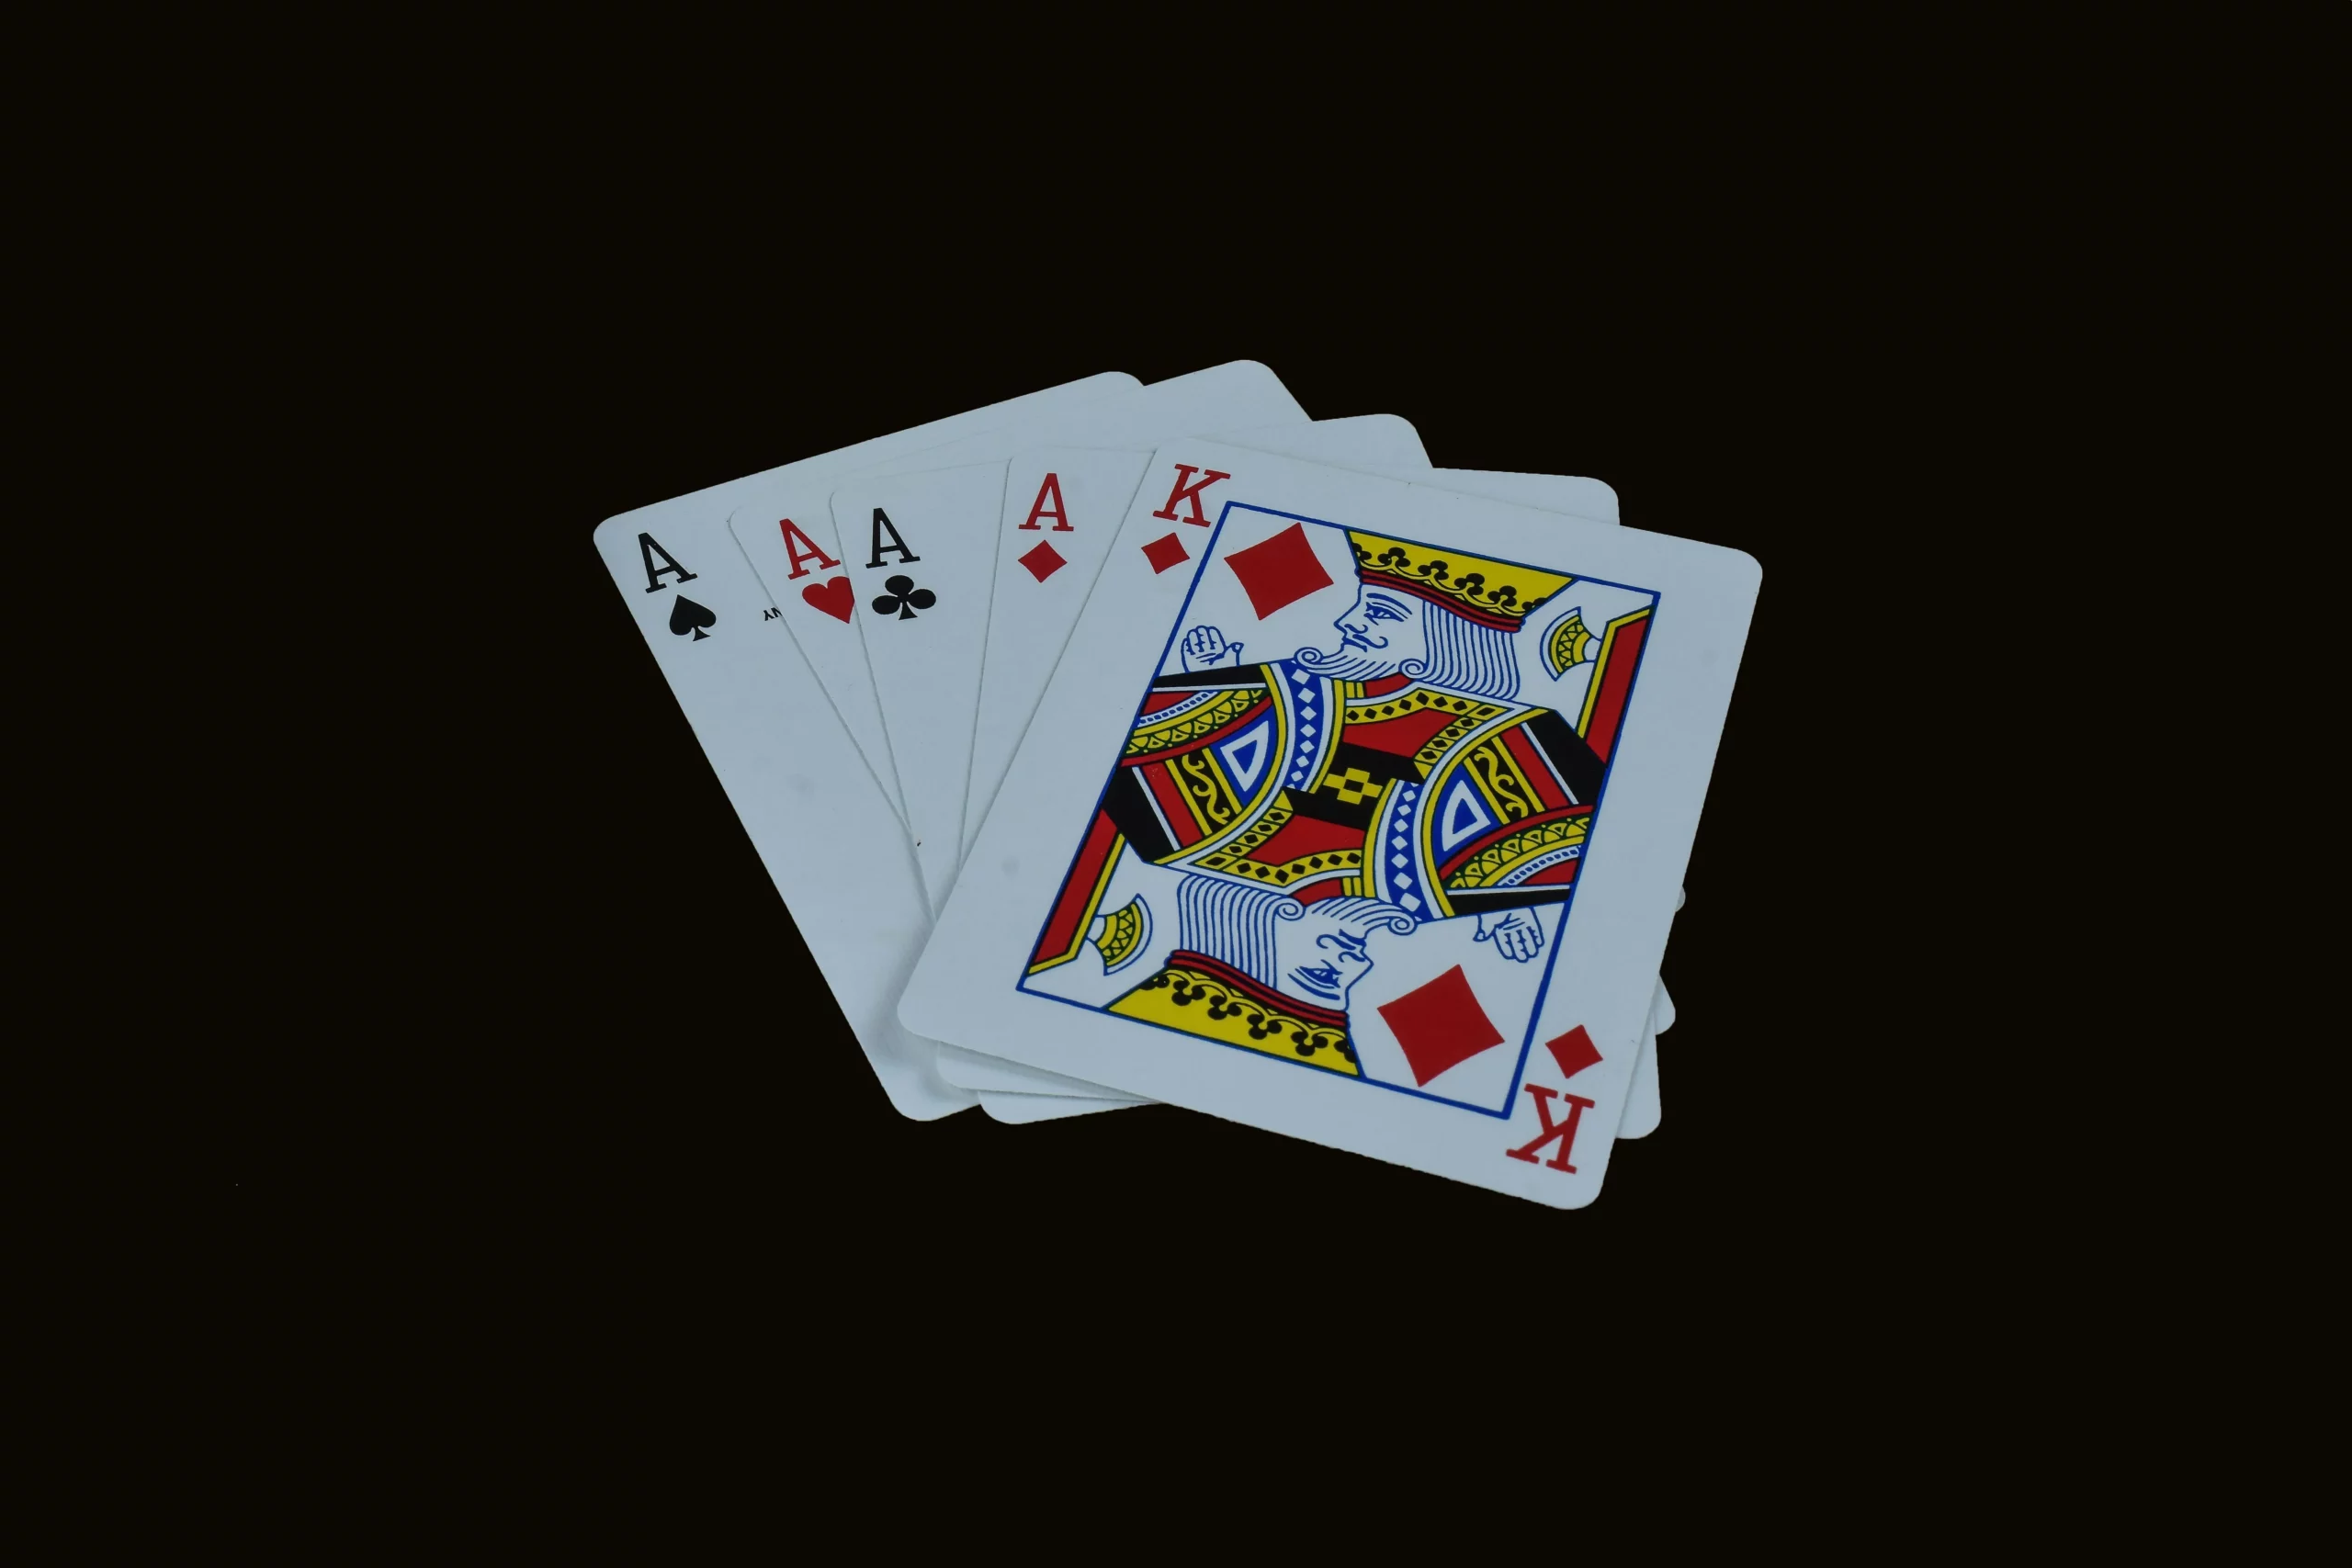 Top Tips on How to Win at Blackjack